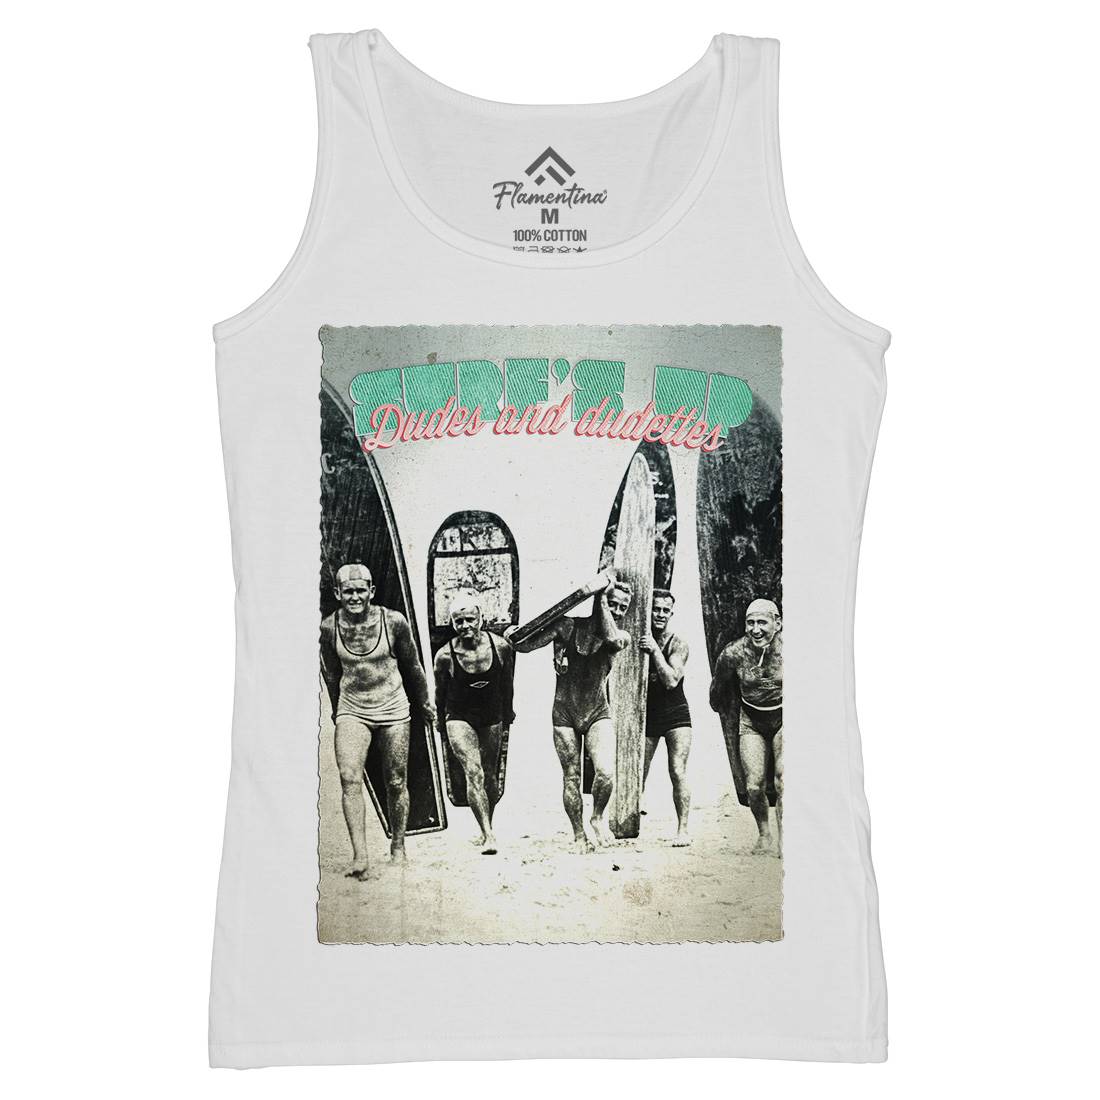 In The Usa Womens Organic Tank Top Vest Surf A917